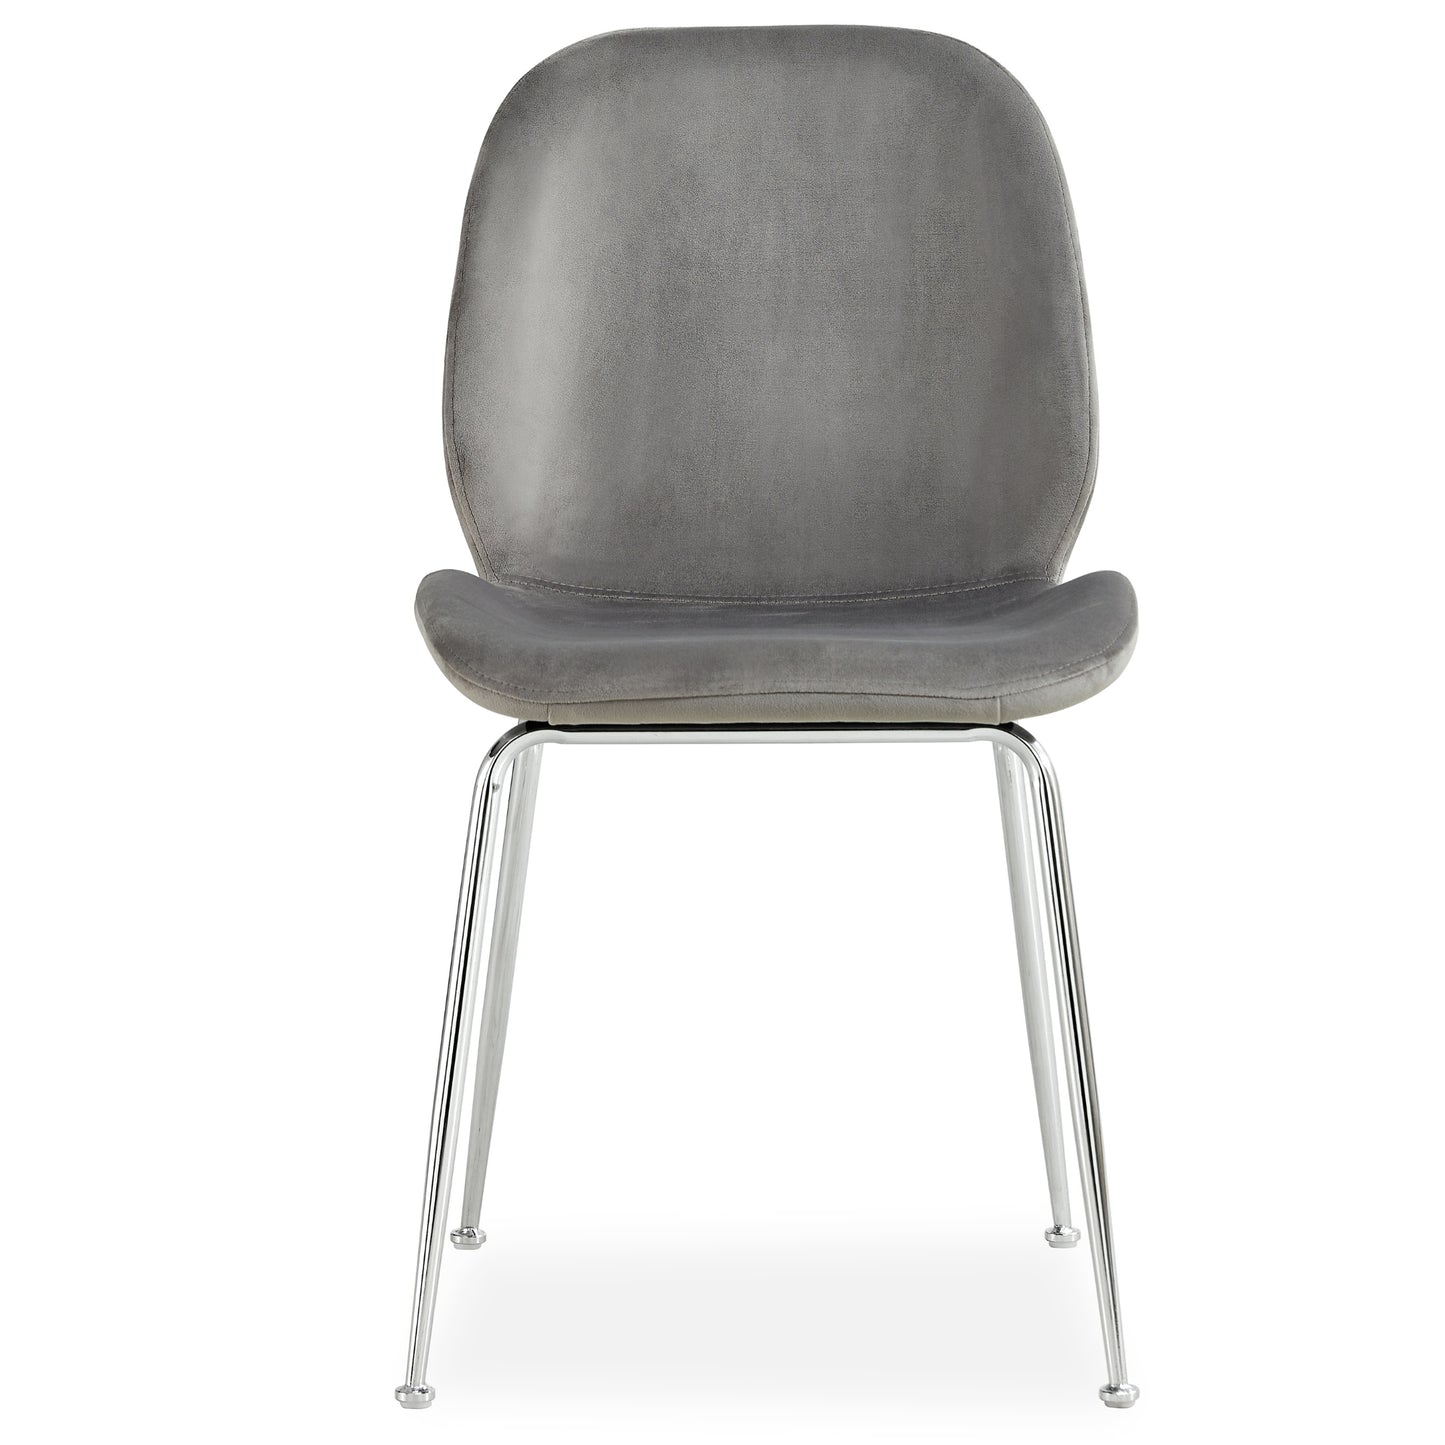 Remy Dining Chair Set of 6 Fabric Seat with Metal Frame - Grey